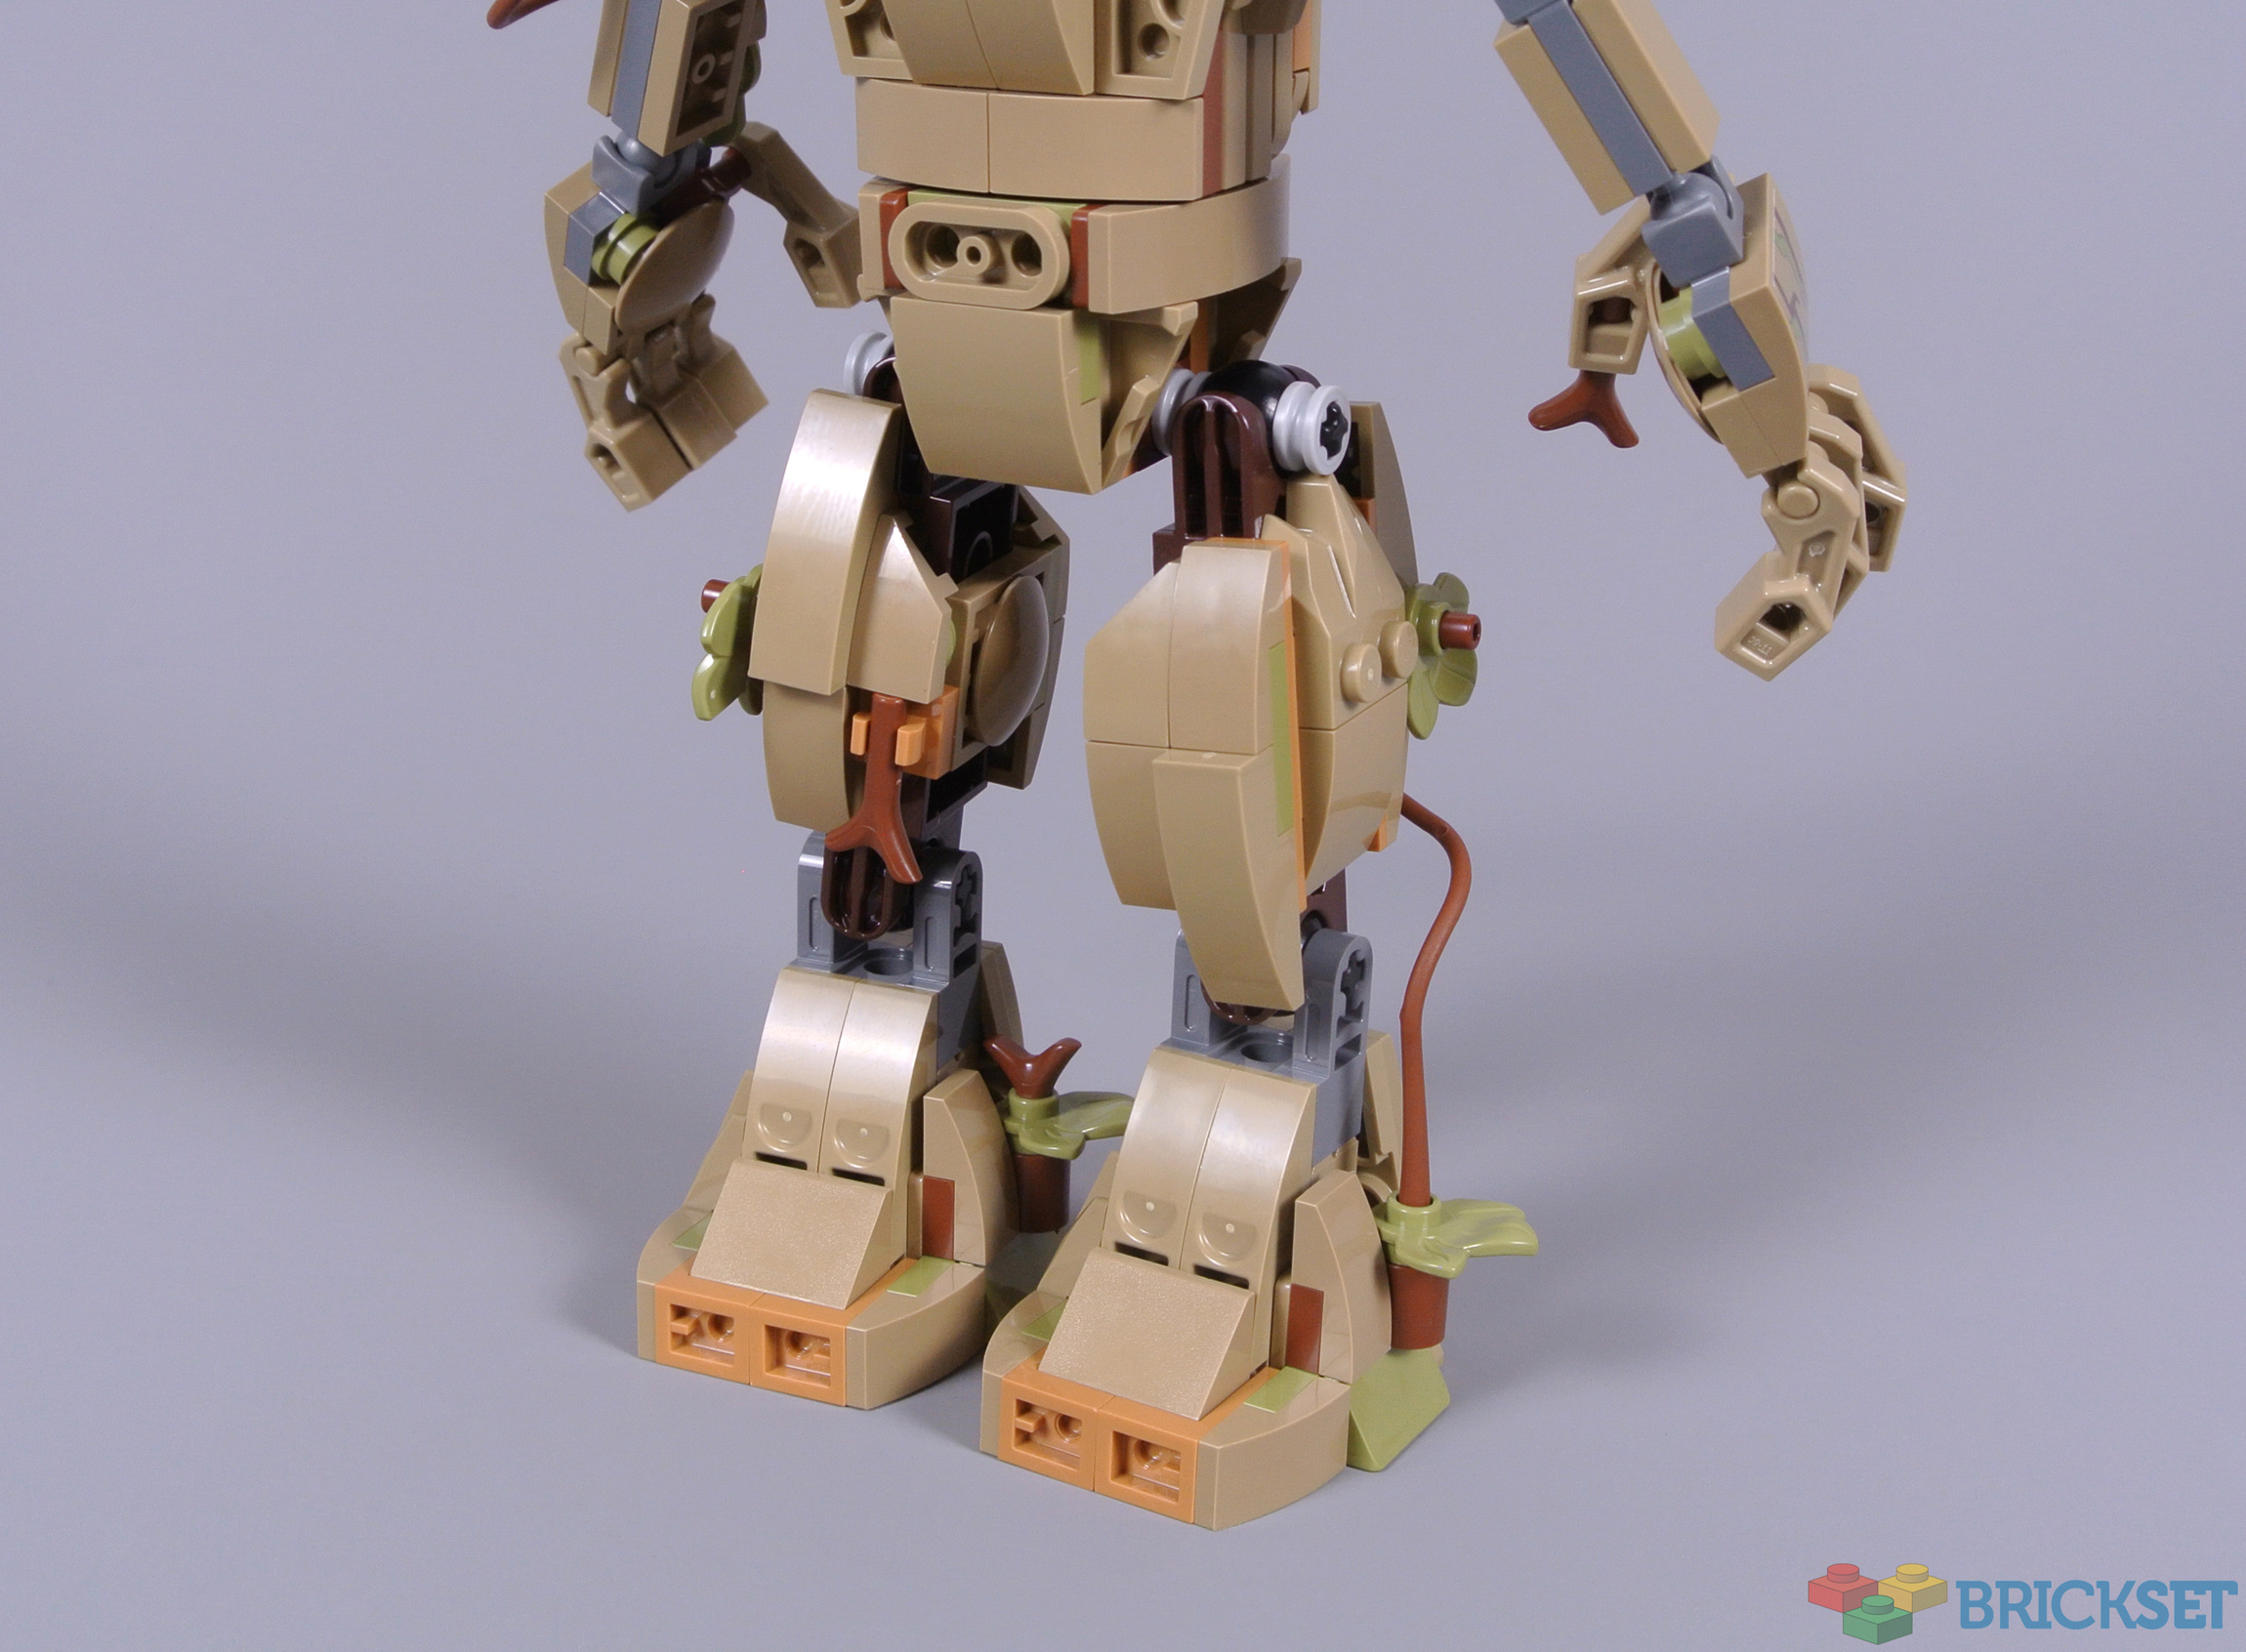 LEGO Marvel 76217 I Am Groot [Review] - The Brothers Brick